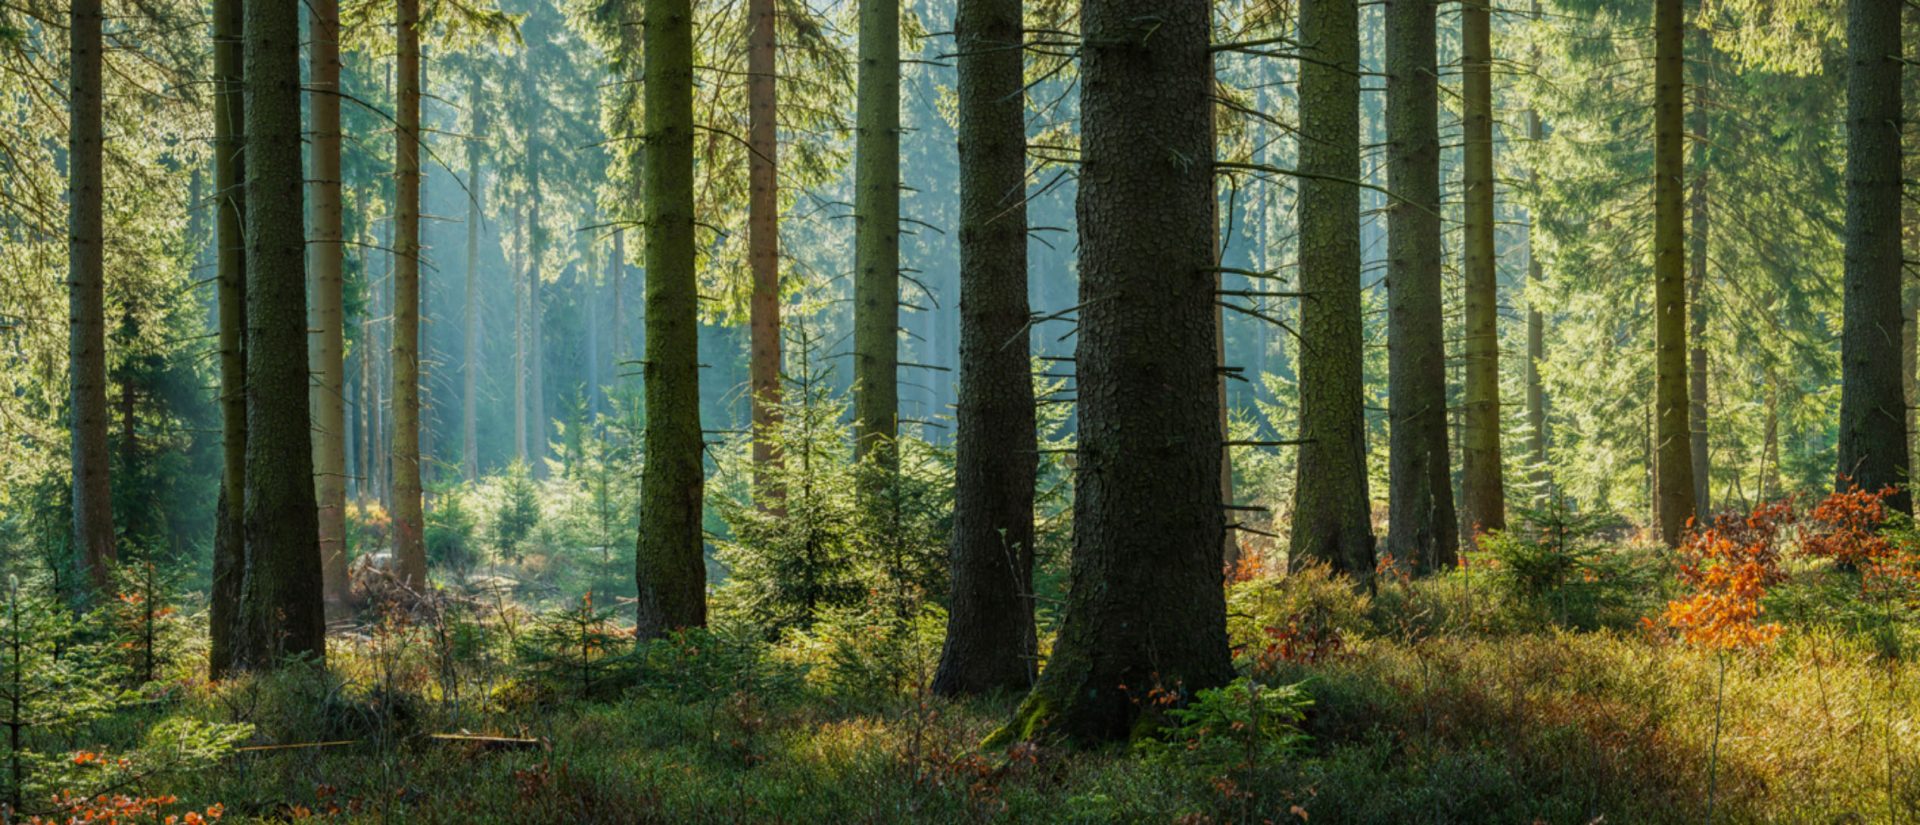 Sustainability page banner image of forest